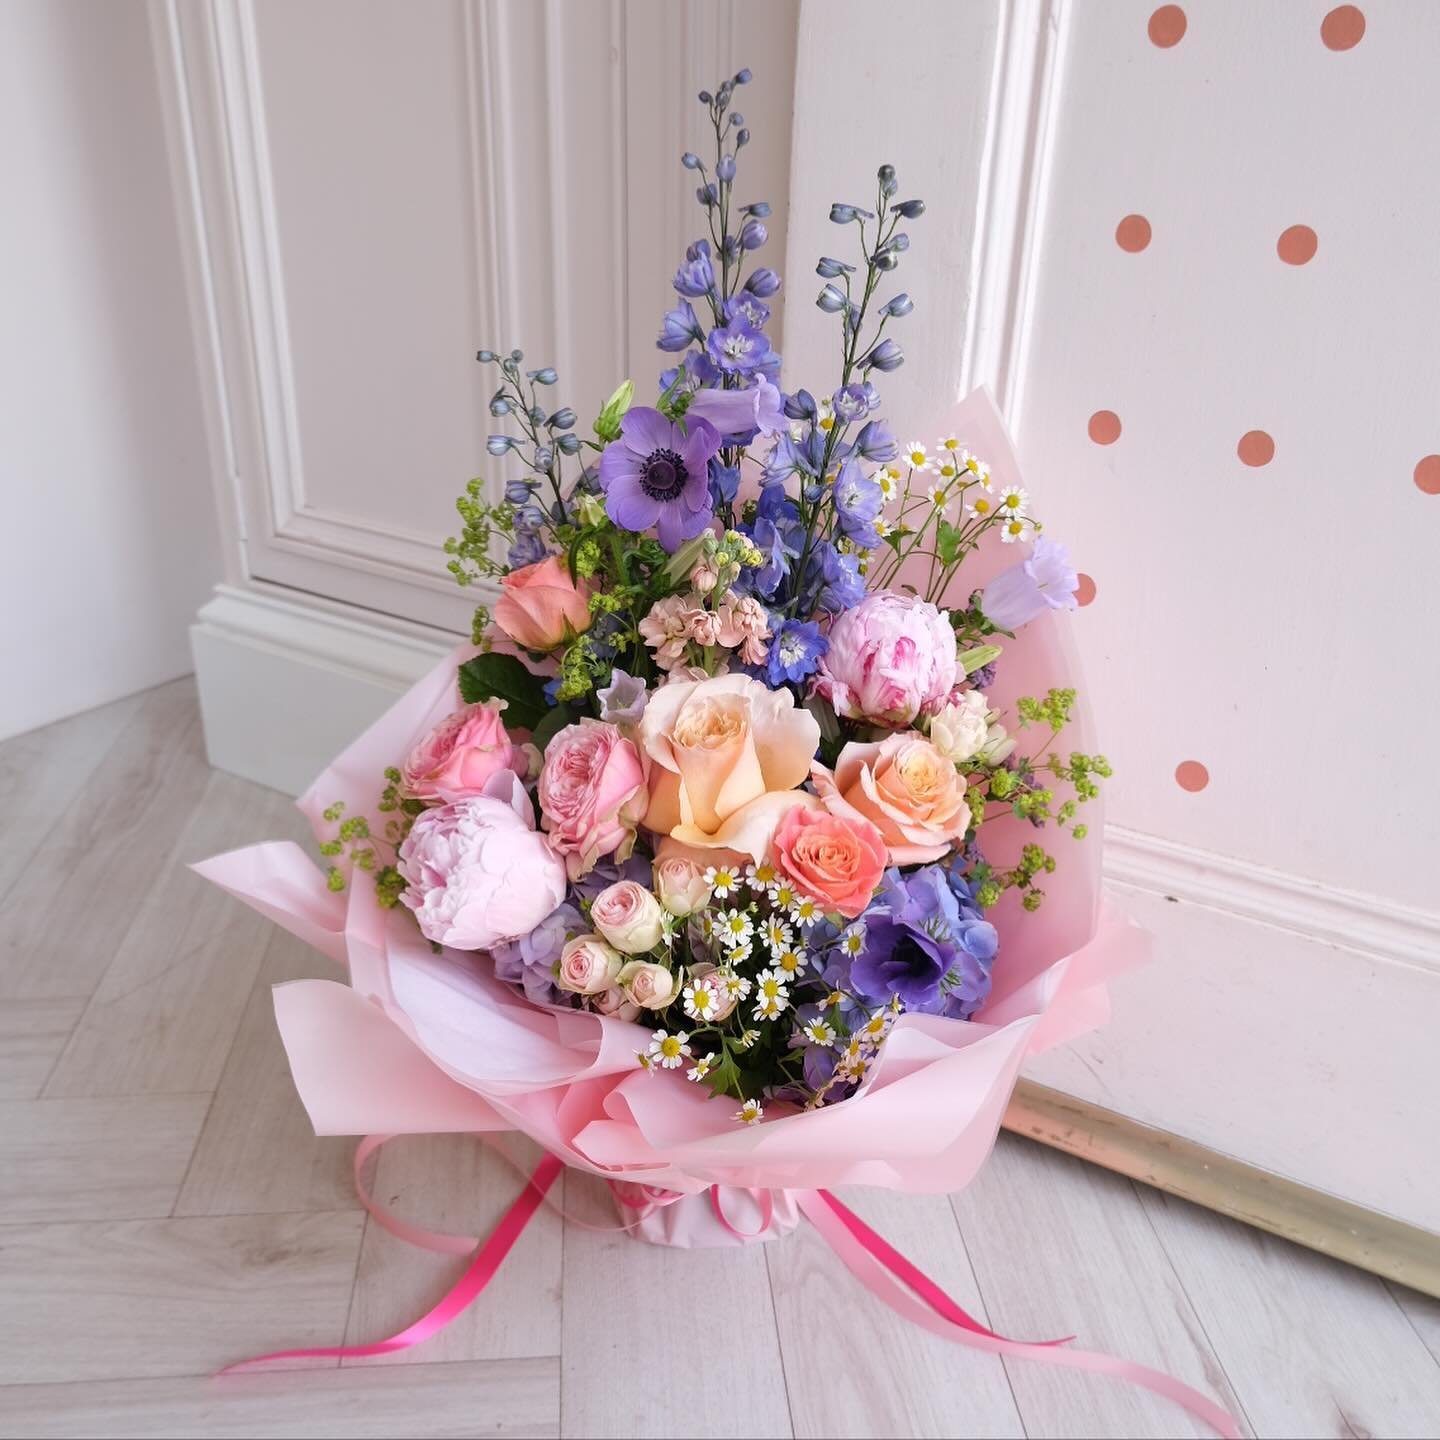 🌸 Weekly Bouquet Design 🌸 

Don&rsquo;t just like, live the pastel dream with our weekly bouquet design now available online! 

Order yours in time for the weekend! 

#florals #peony #pinkflowers #flowers🌸 #flowerpower #flowerlovers #flowerlove #f